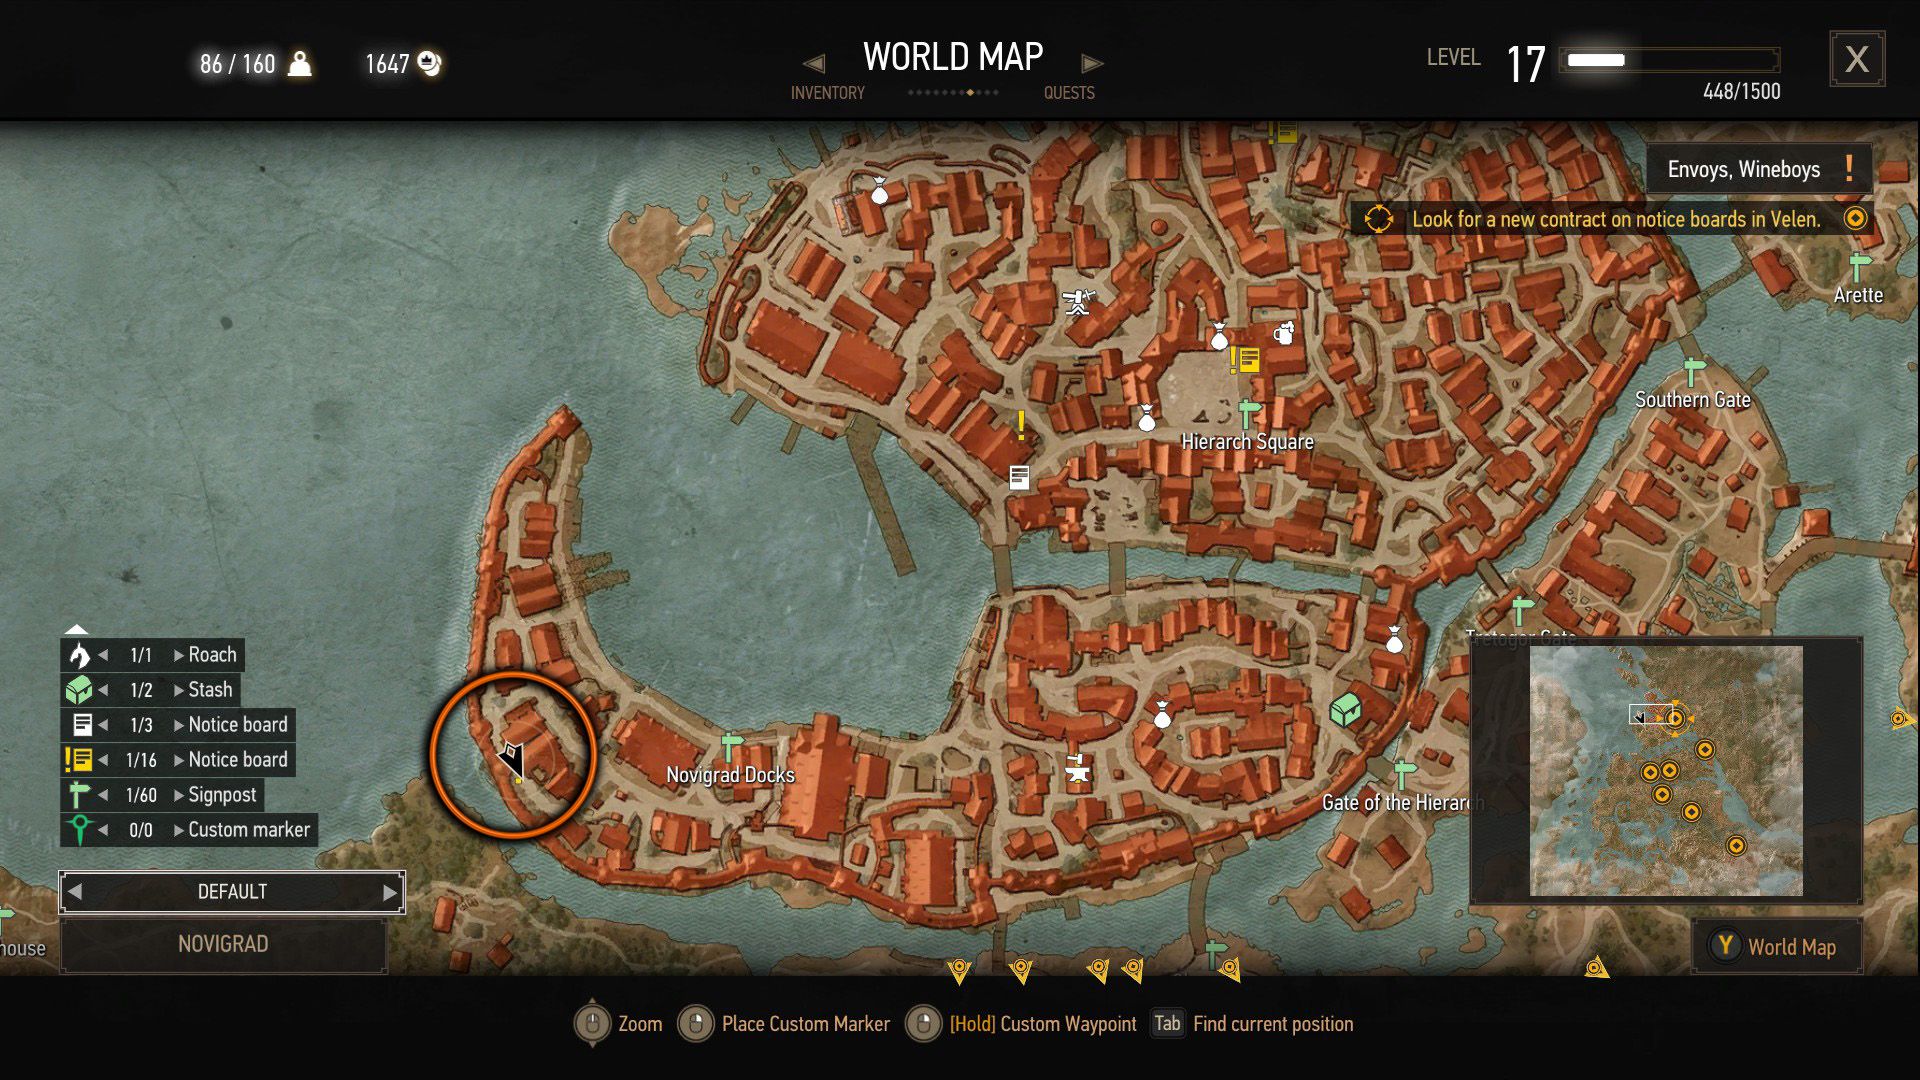 A screenshot of The Witcher 3's map of Novigrad with an orange circle over the quest location.